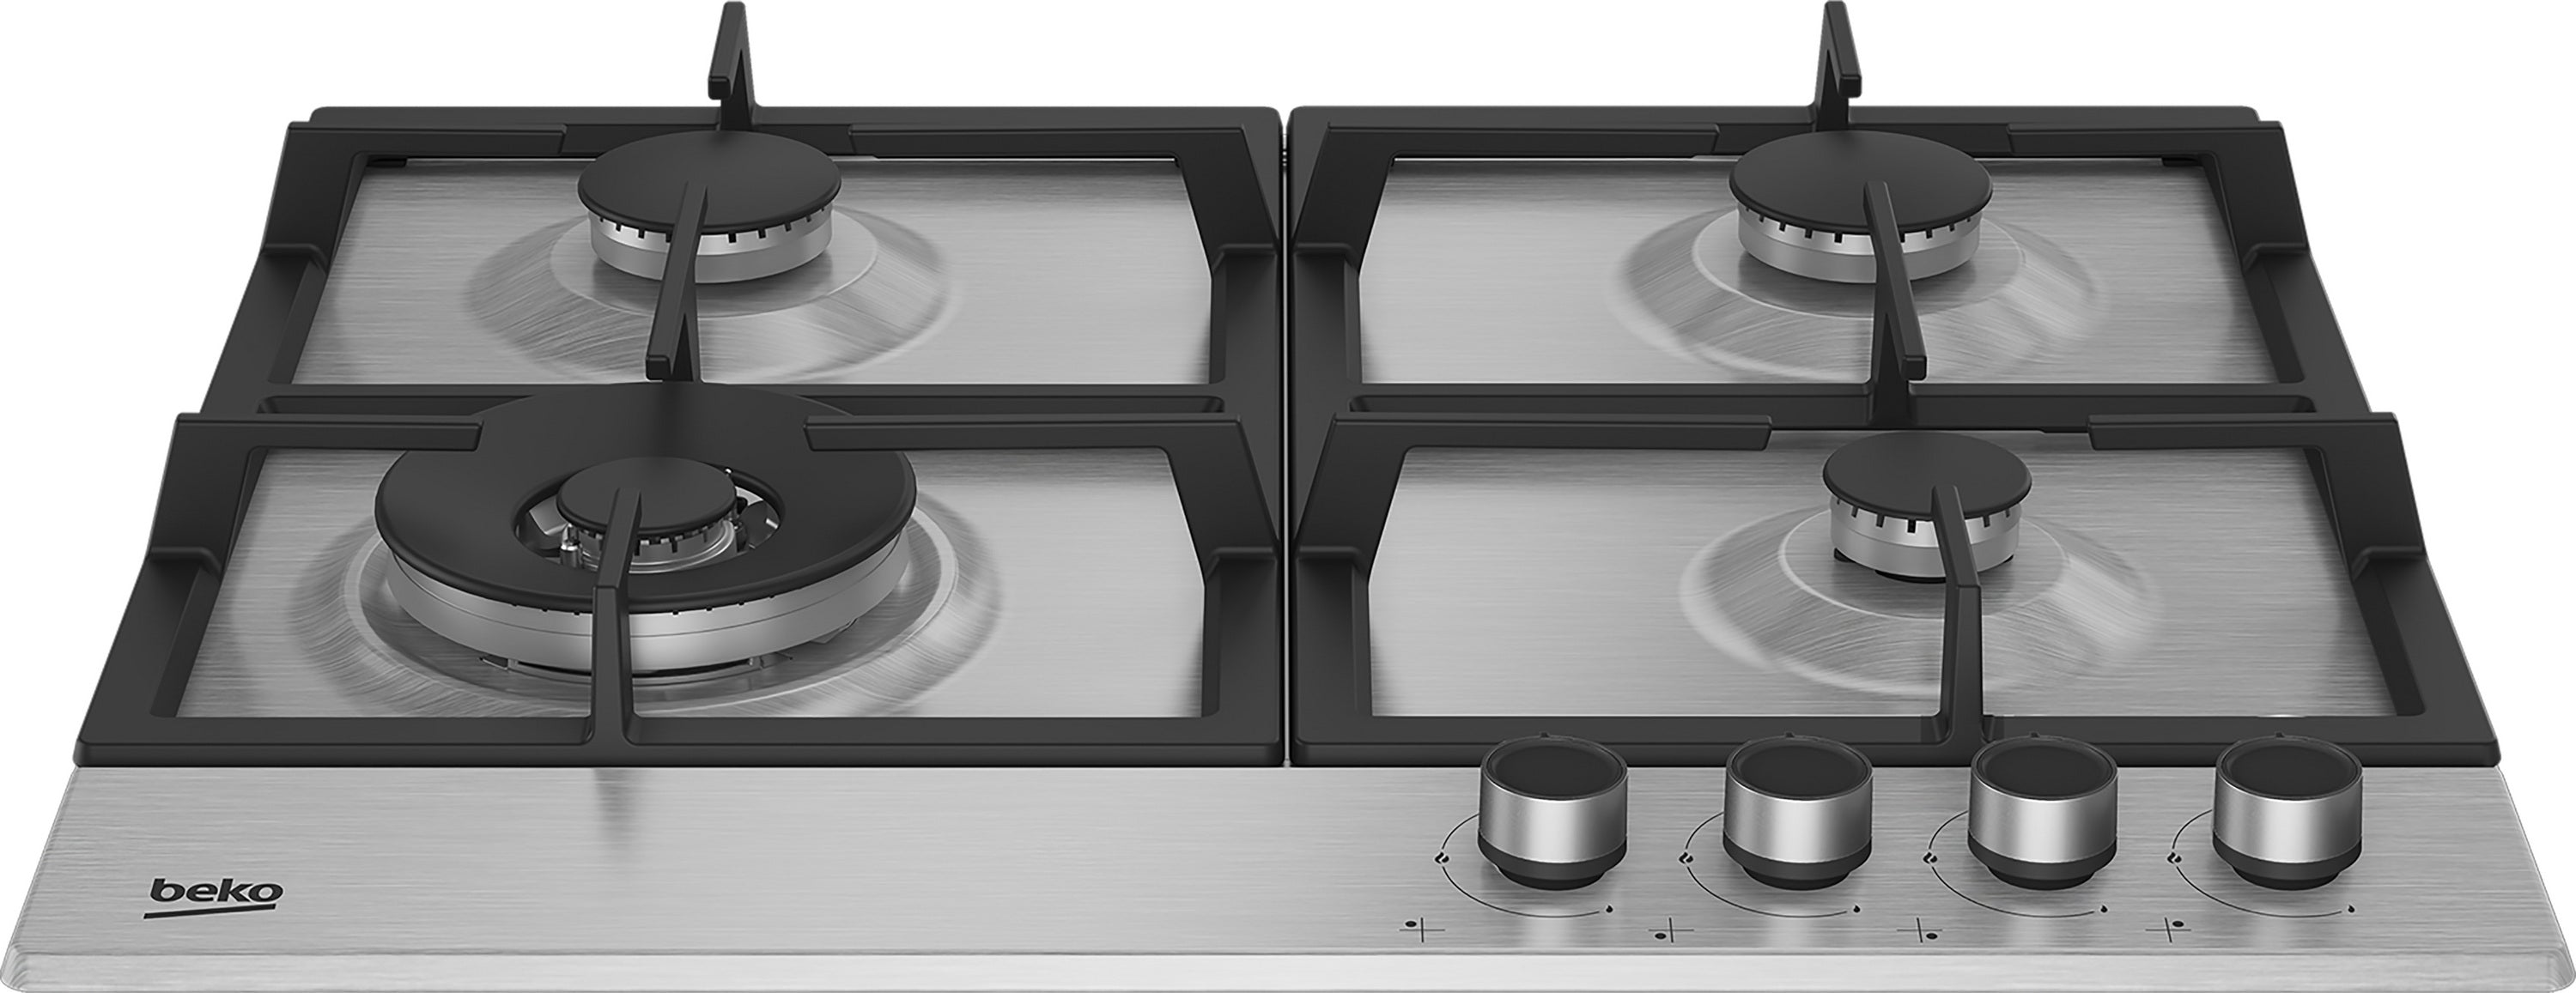 Beko HIAW64225SX 60cm Stainless Steel and Black Cast Iron Built in Gas Hob